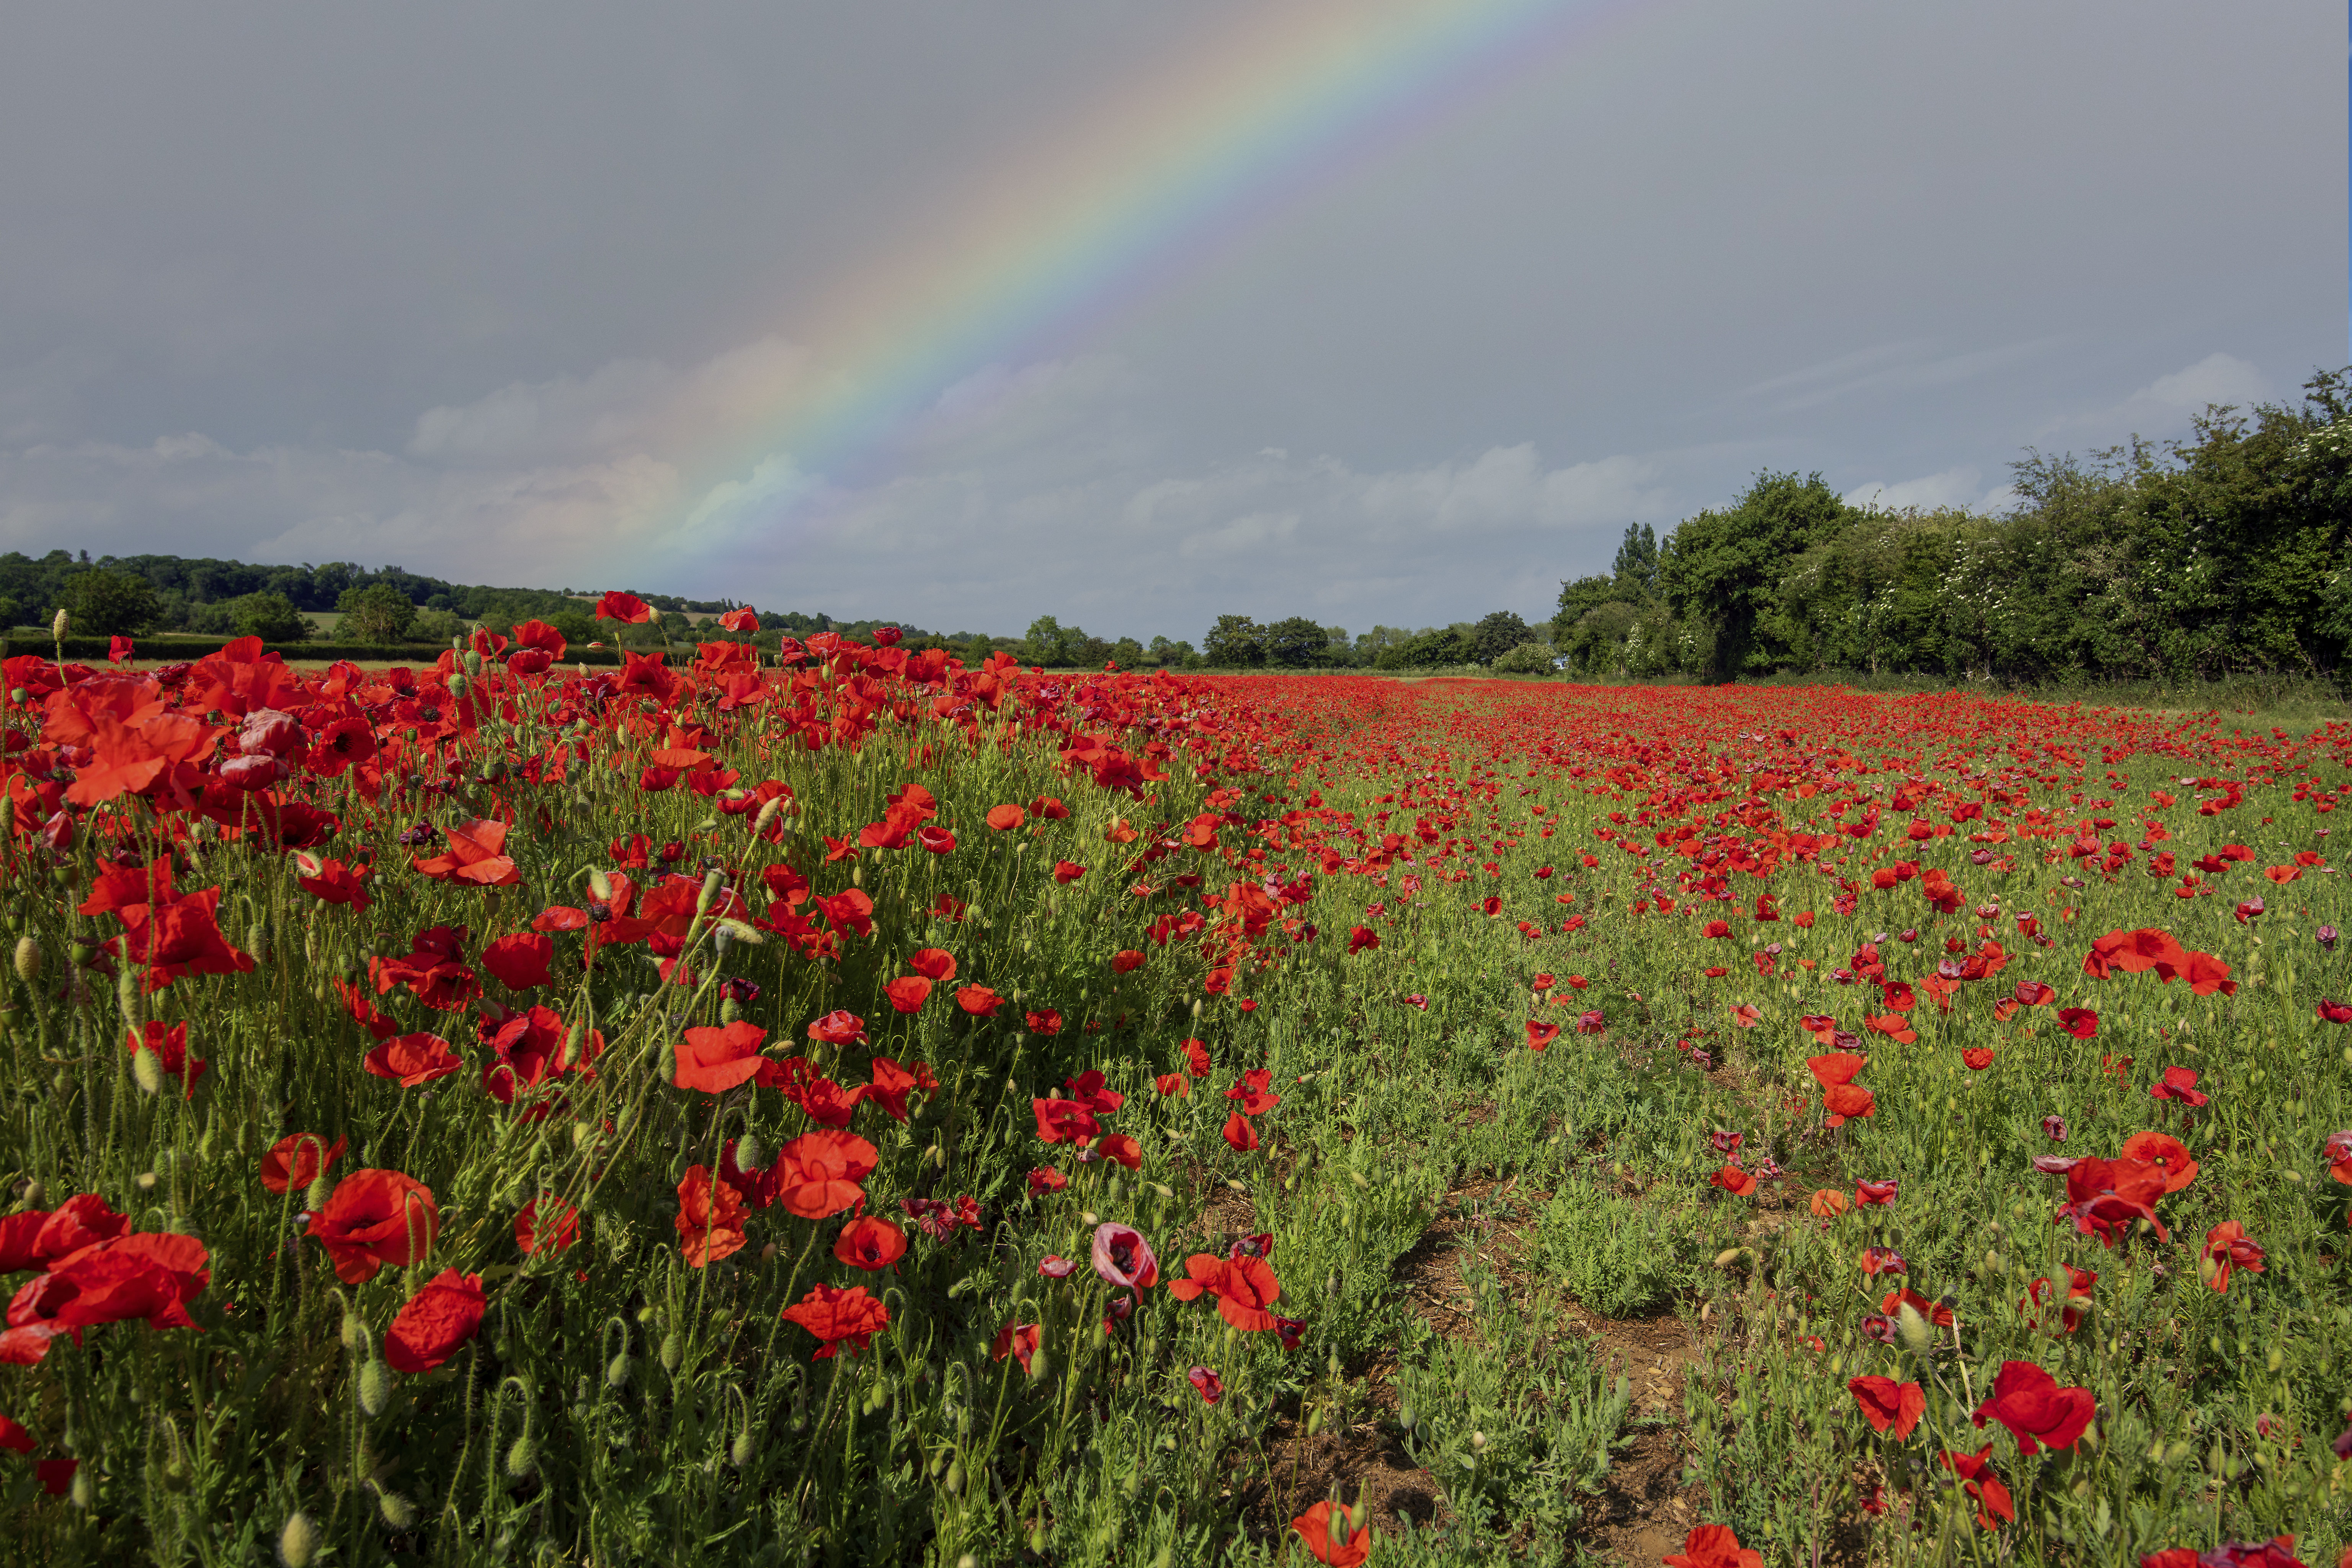 63812 download wallpaper poppies, flowers, sky, rainbow, field screensavers and pictures for free